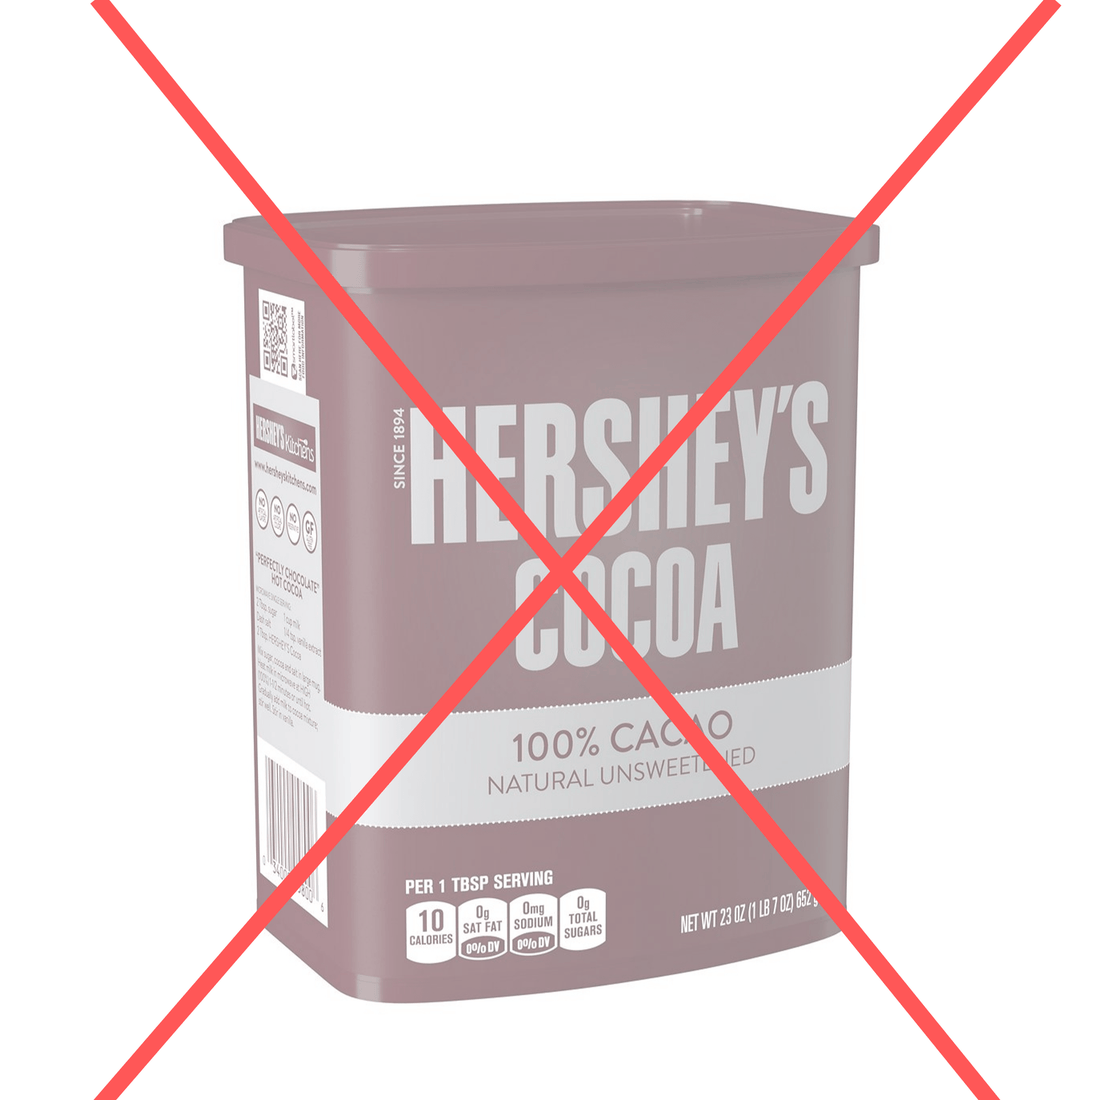 Sacred 7 Does Not Contain Cocoa Powder